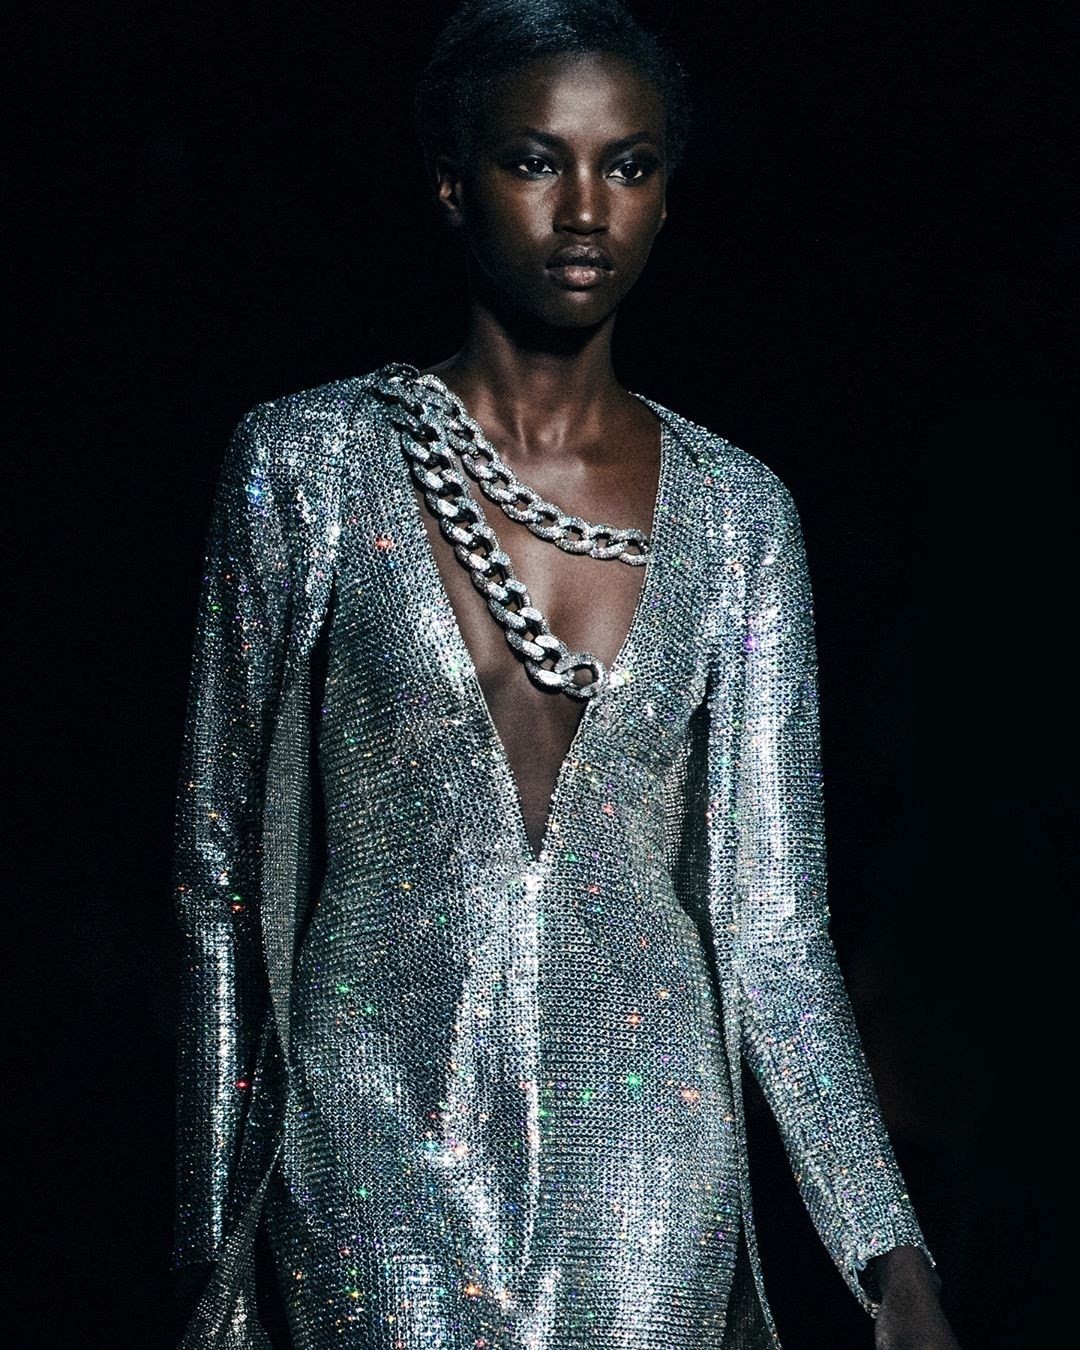 Tom Ford Autumn/Winter 2019